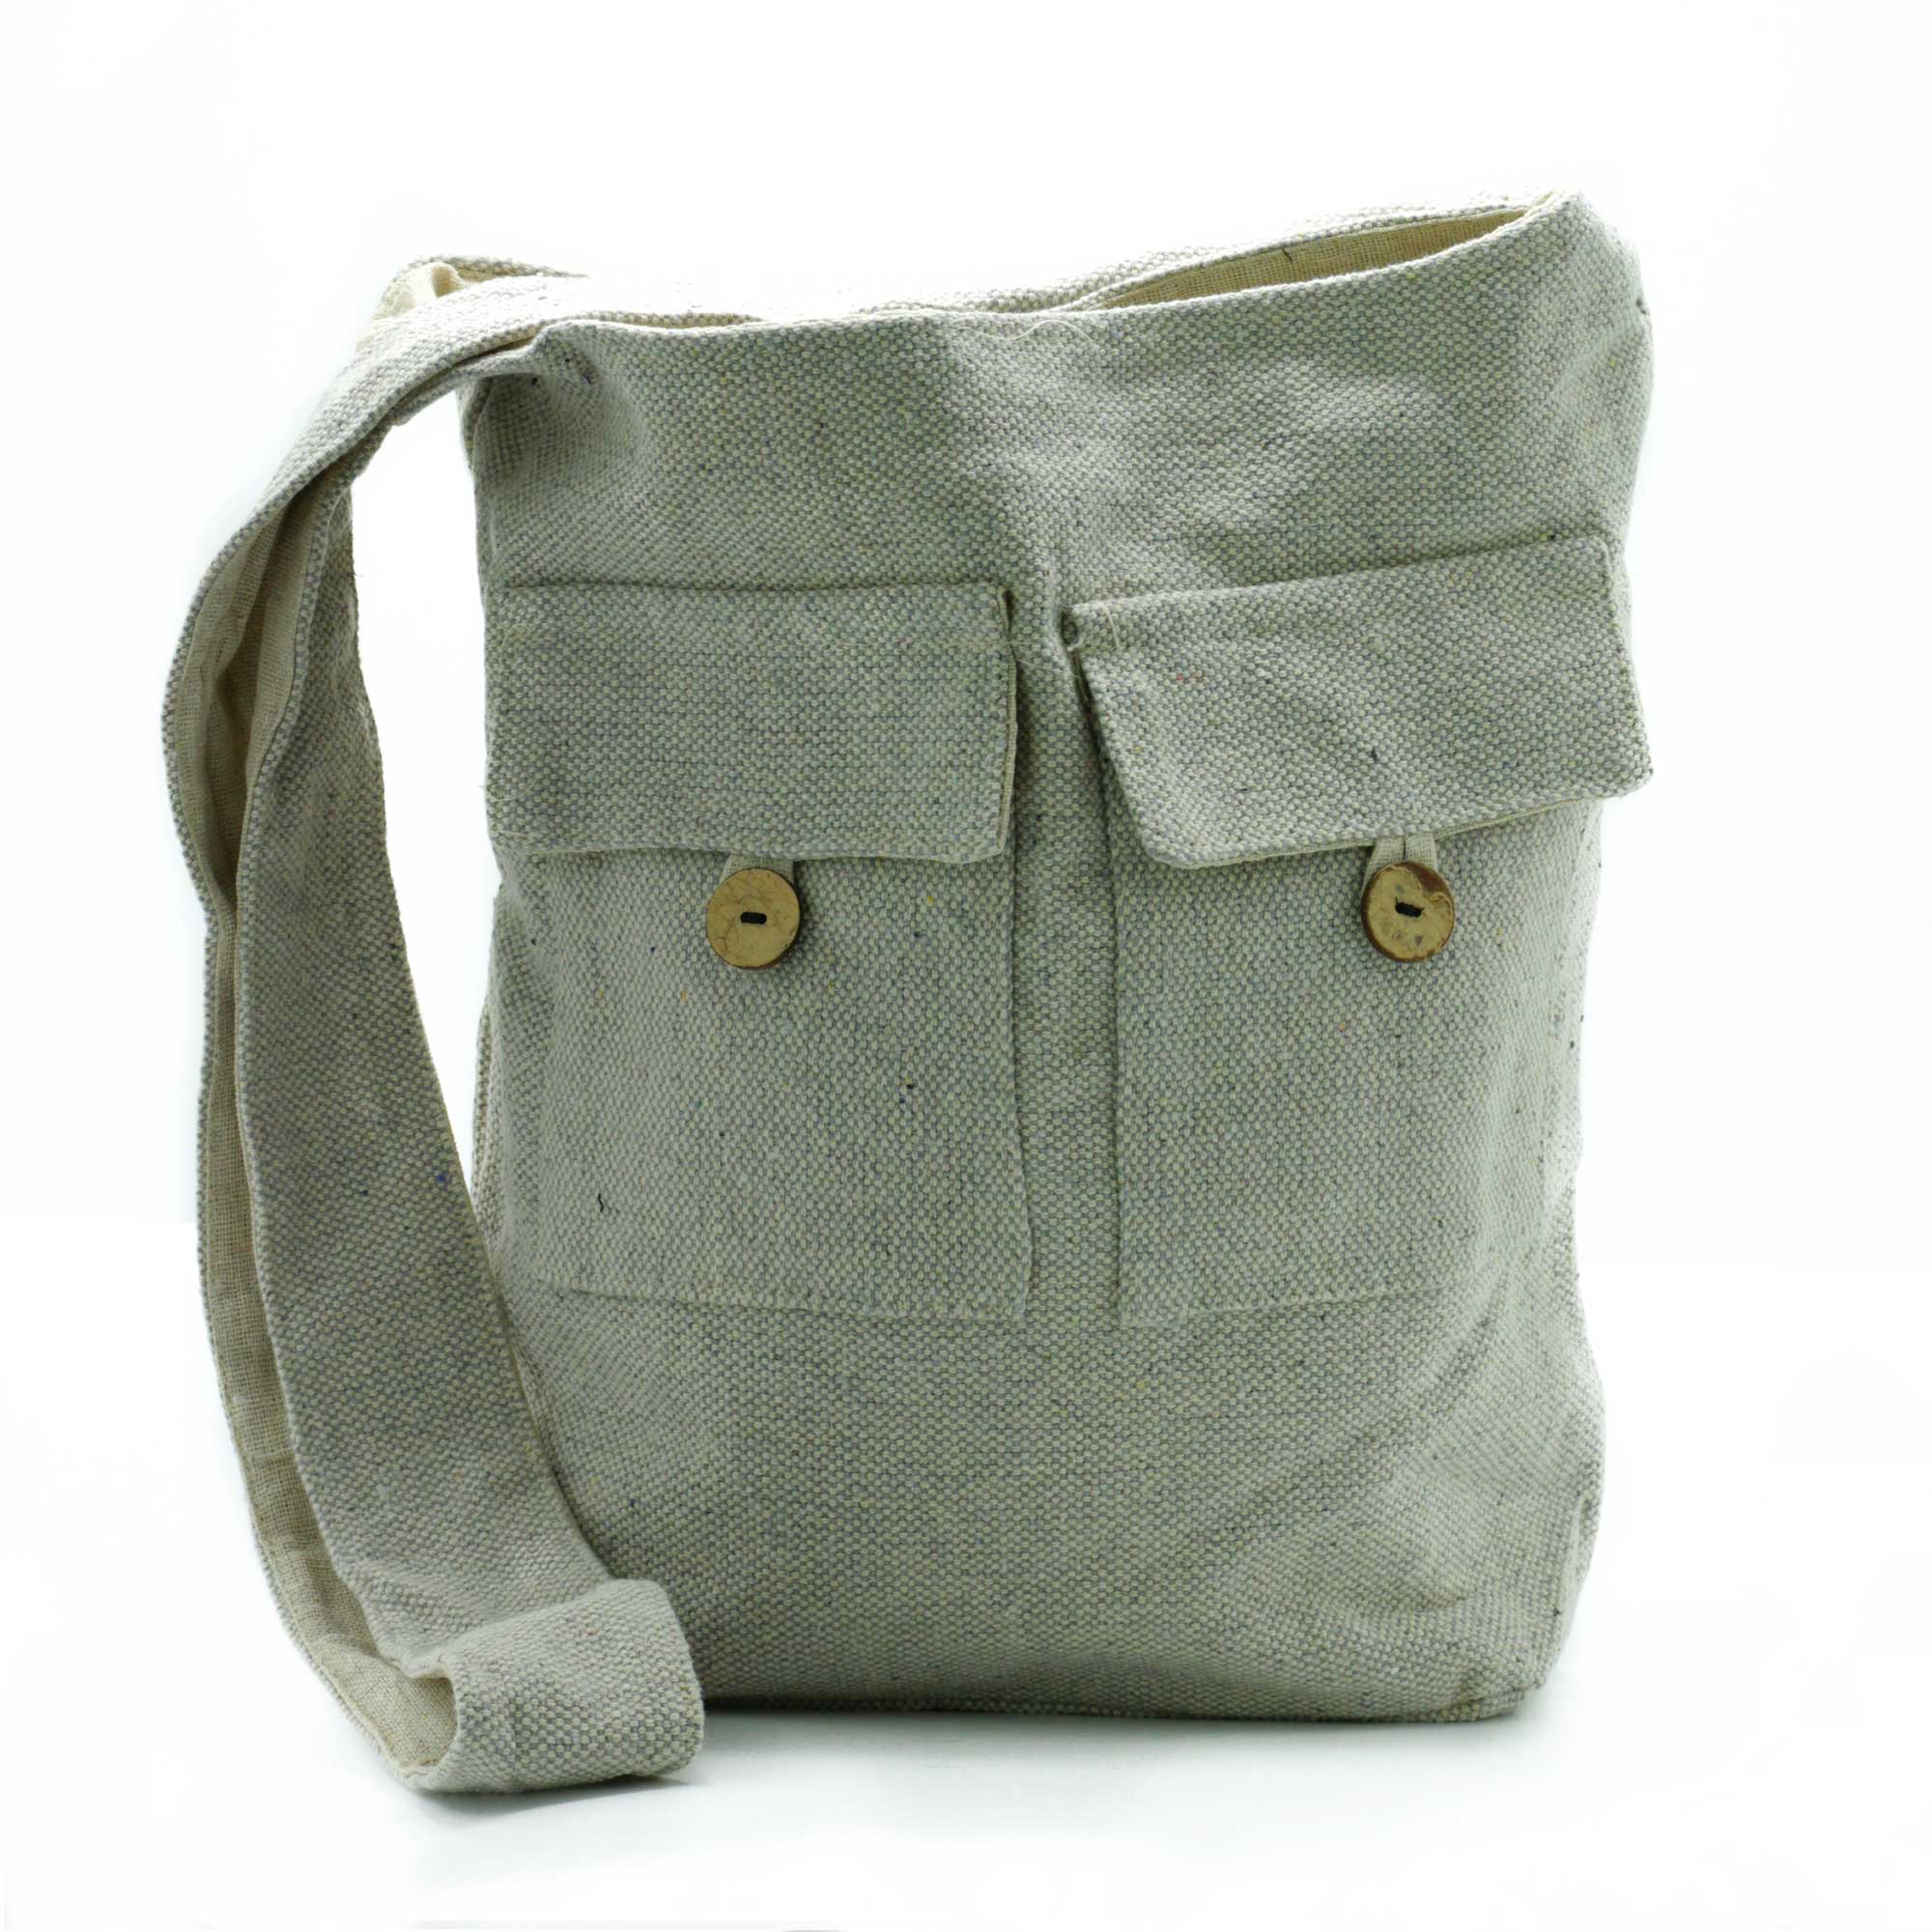 View Natural Tones Two Pocket Bags Stone Large information